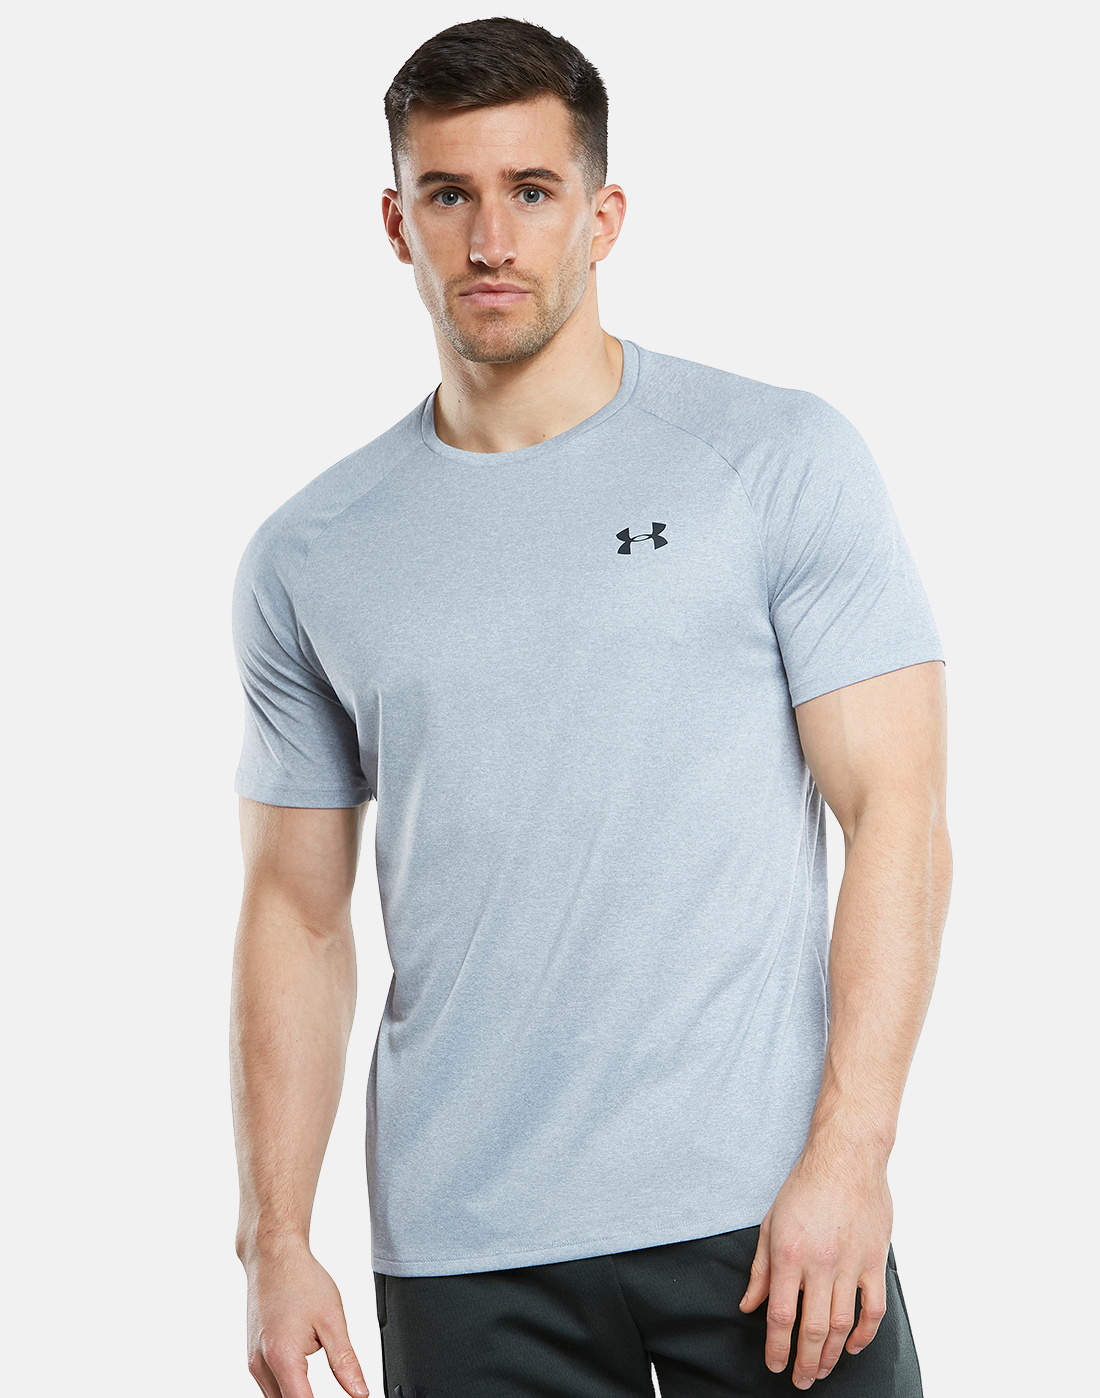 Under Armour Mens Tech 2.0 T-shirt - Grey | Life Style Sports IE